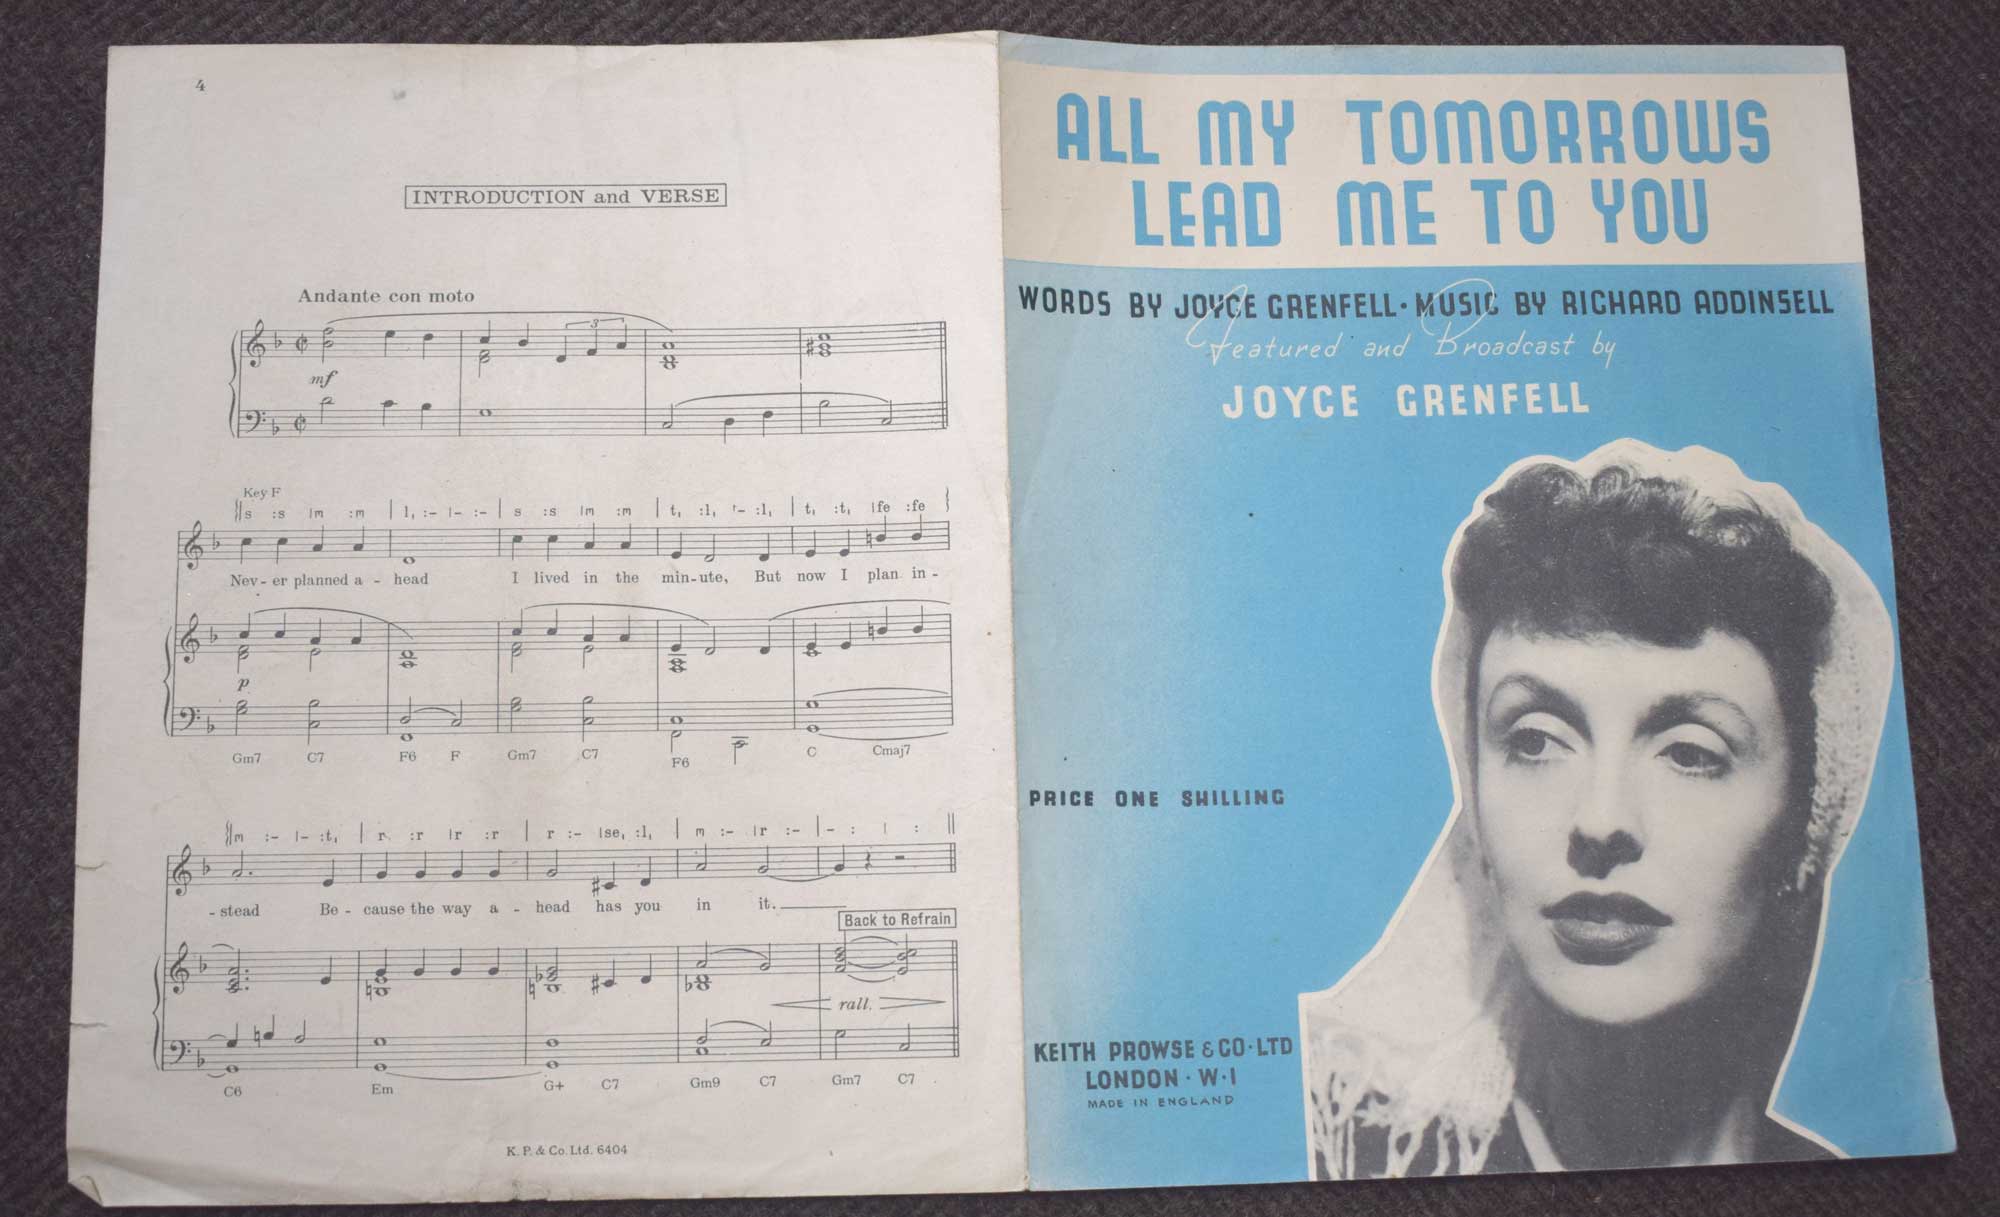 All my Tomorrows Lead me to You (Sheet music)